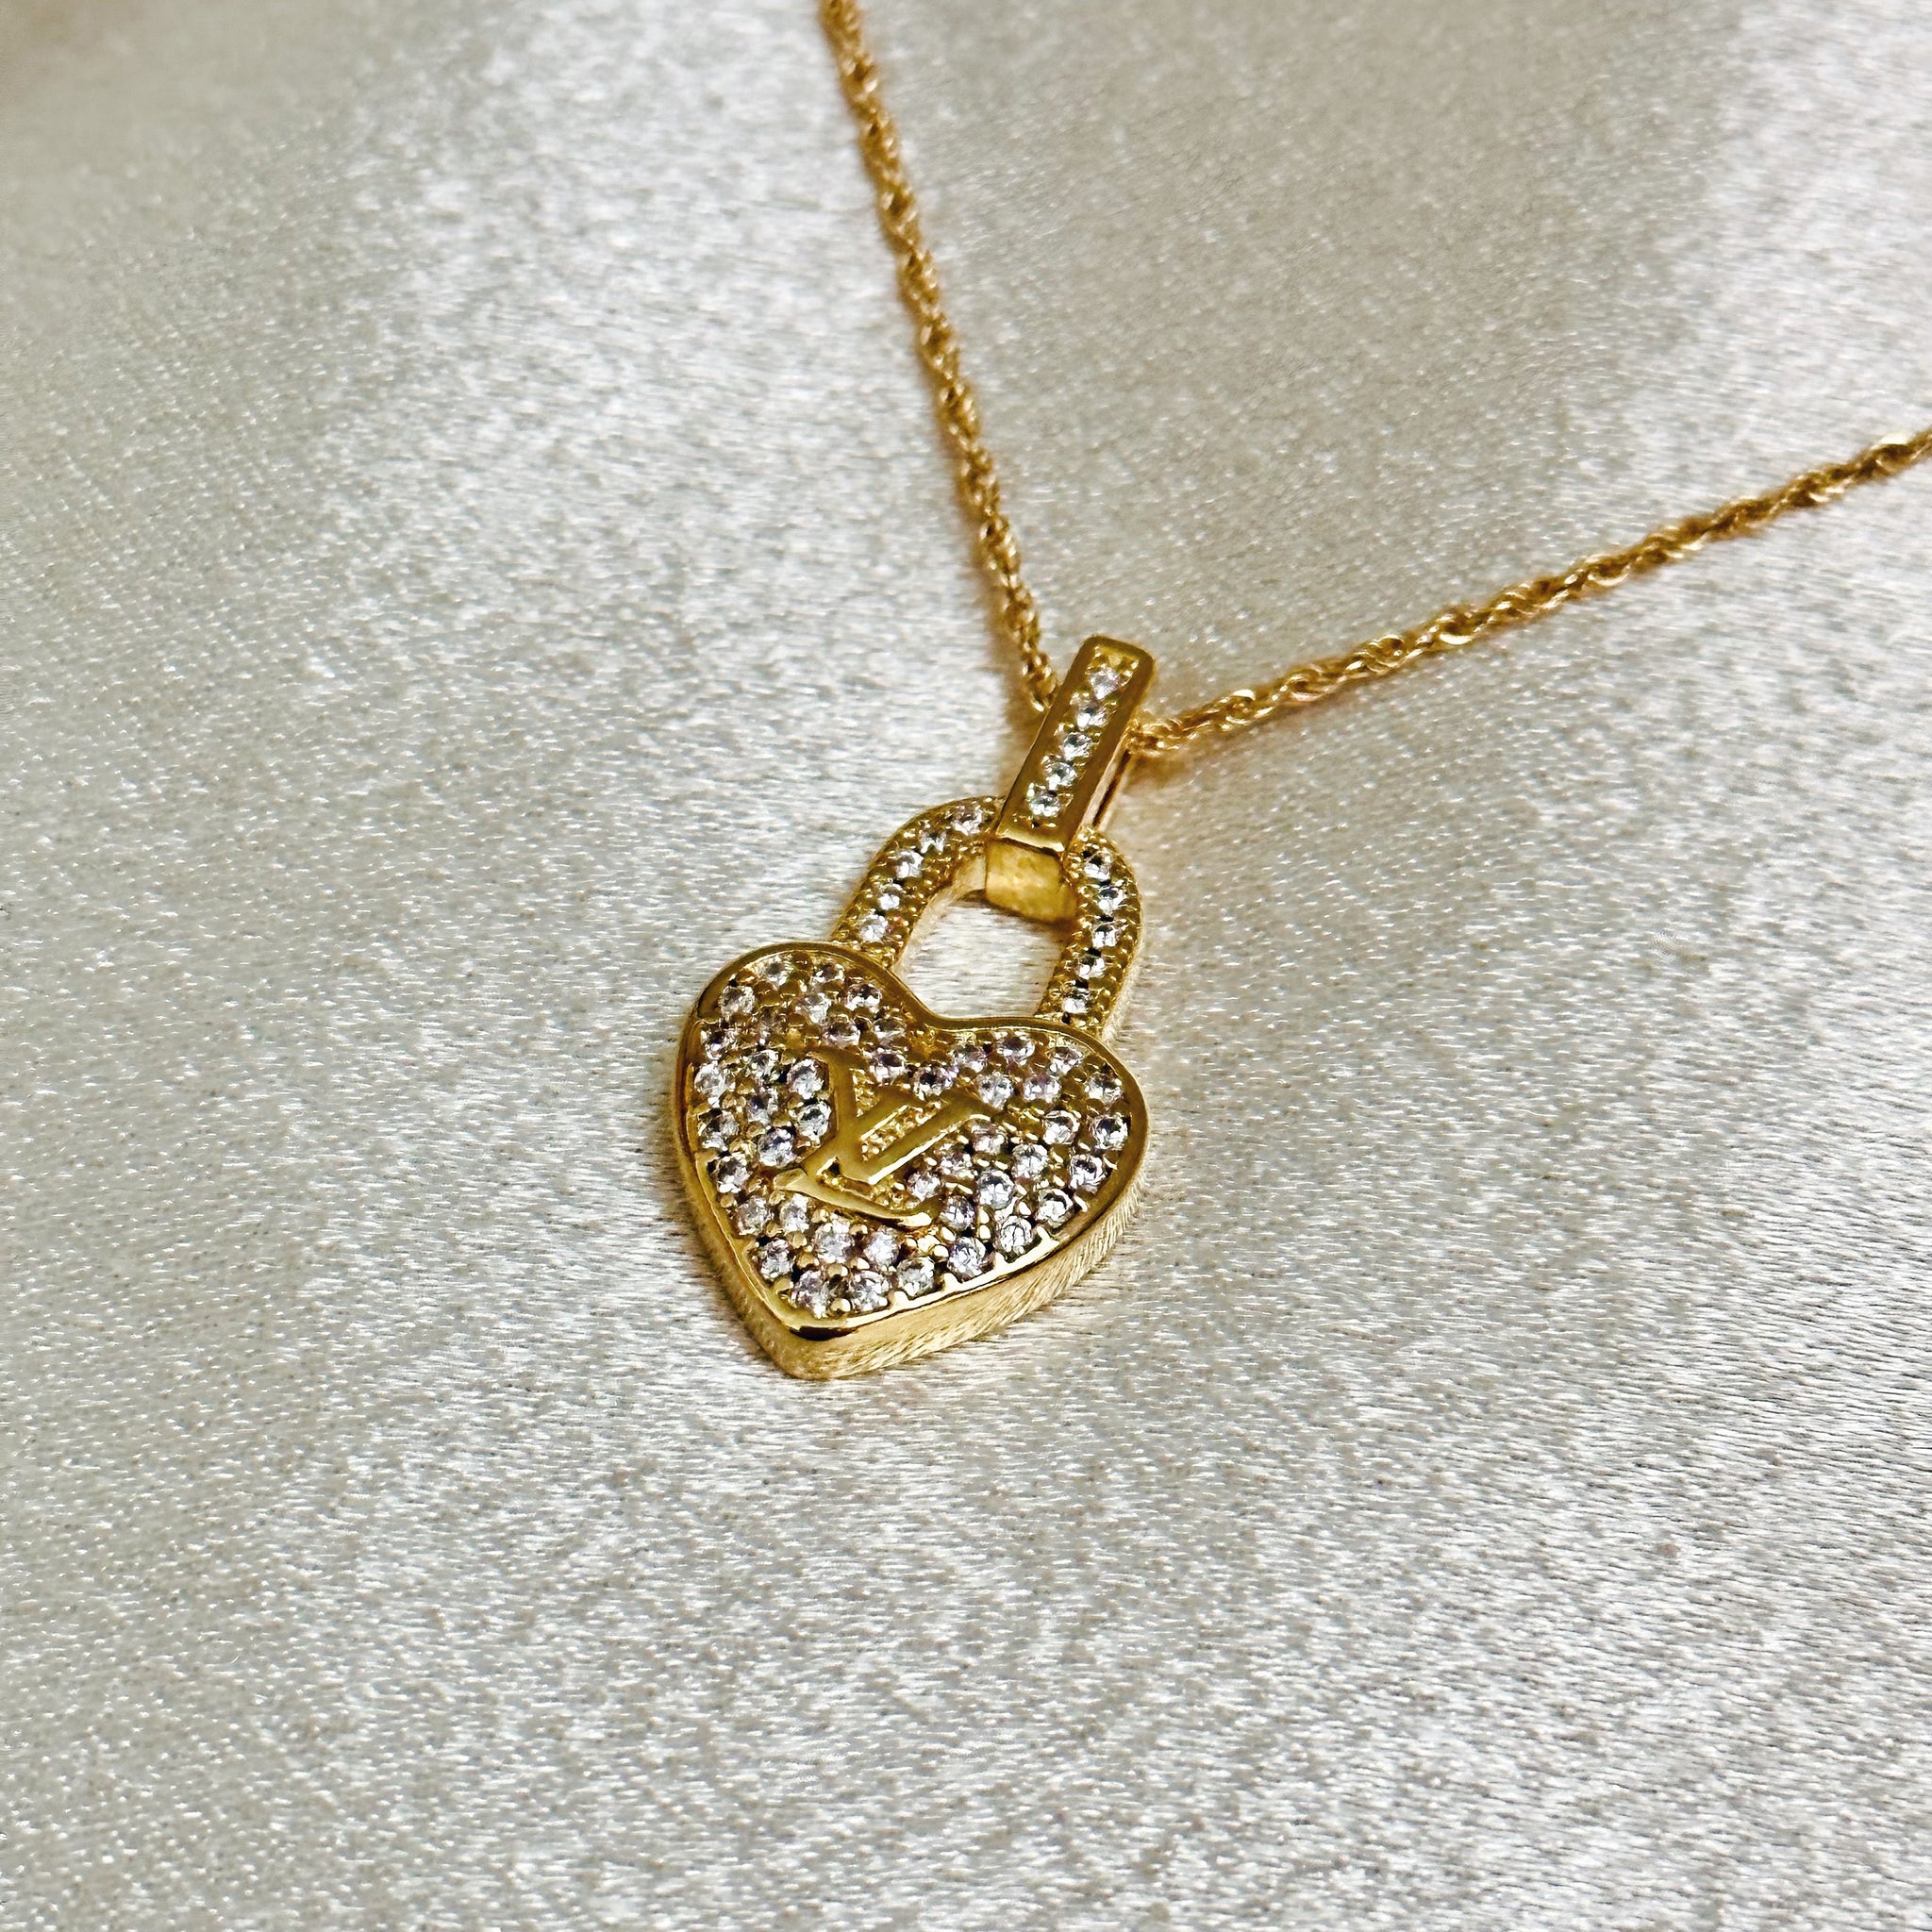 Authentic Gold Louis Vuitton Heart Charm- Gold LV Logo-18K Gold Filled Satellite Necklace.